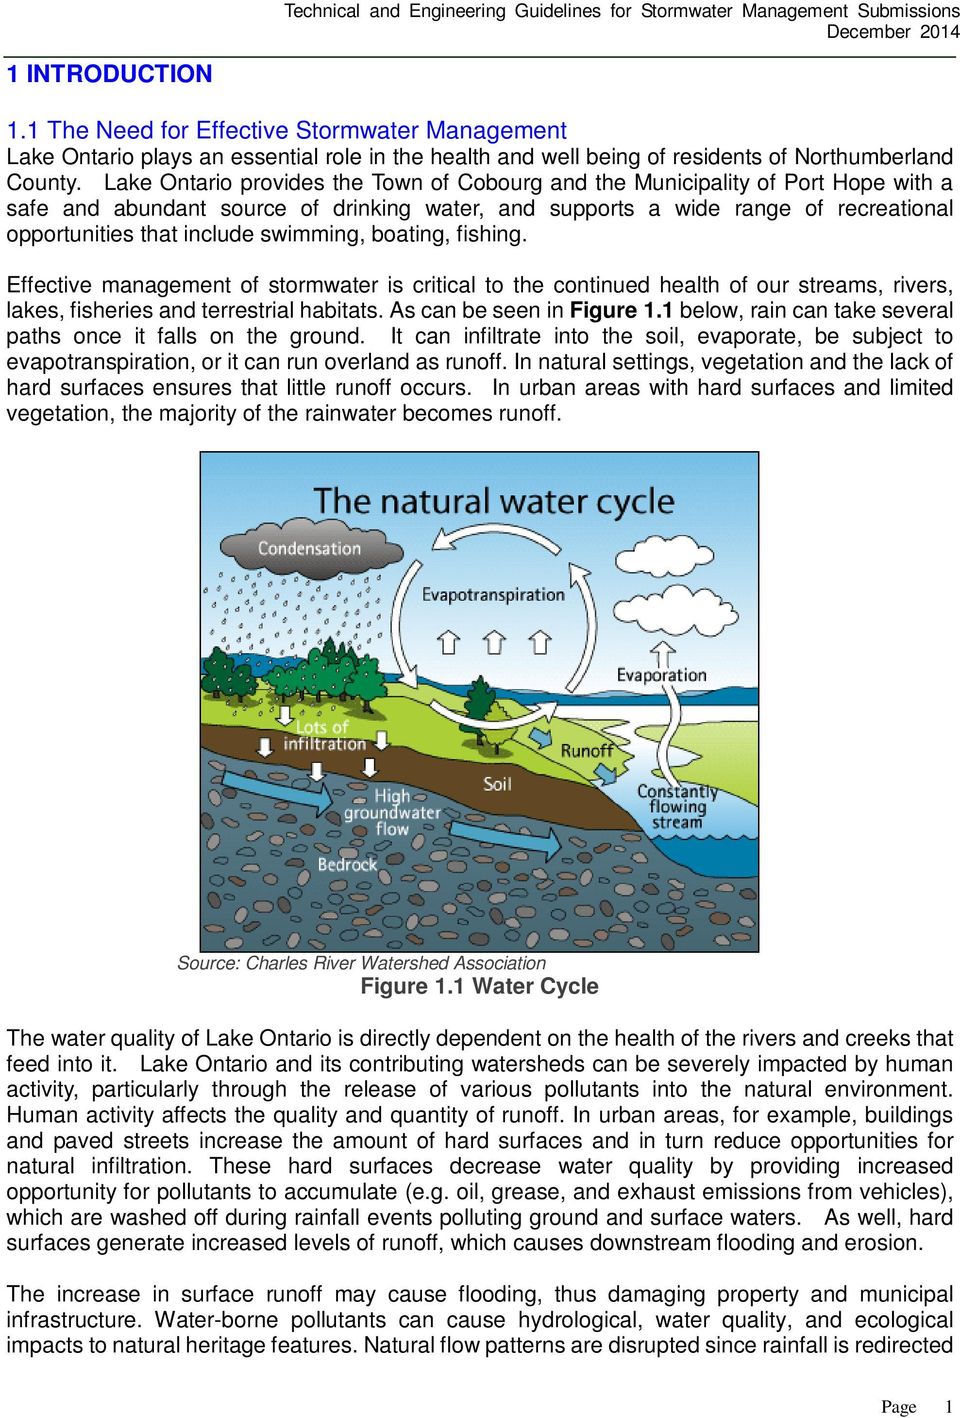 swimming, boating, fishing. Effective management of stormwater is critical to the continued health of our streams, rivers, lakes, fisheries and terrestrial habitats. As can be seen in Figure 1.